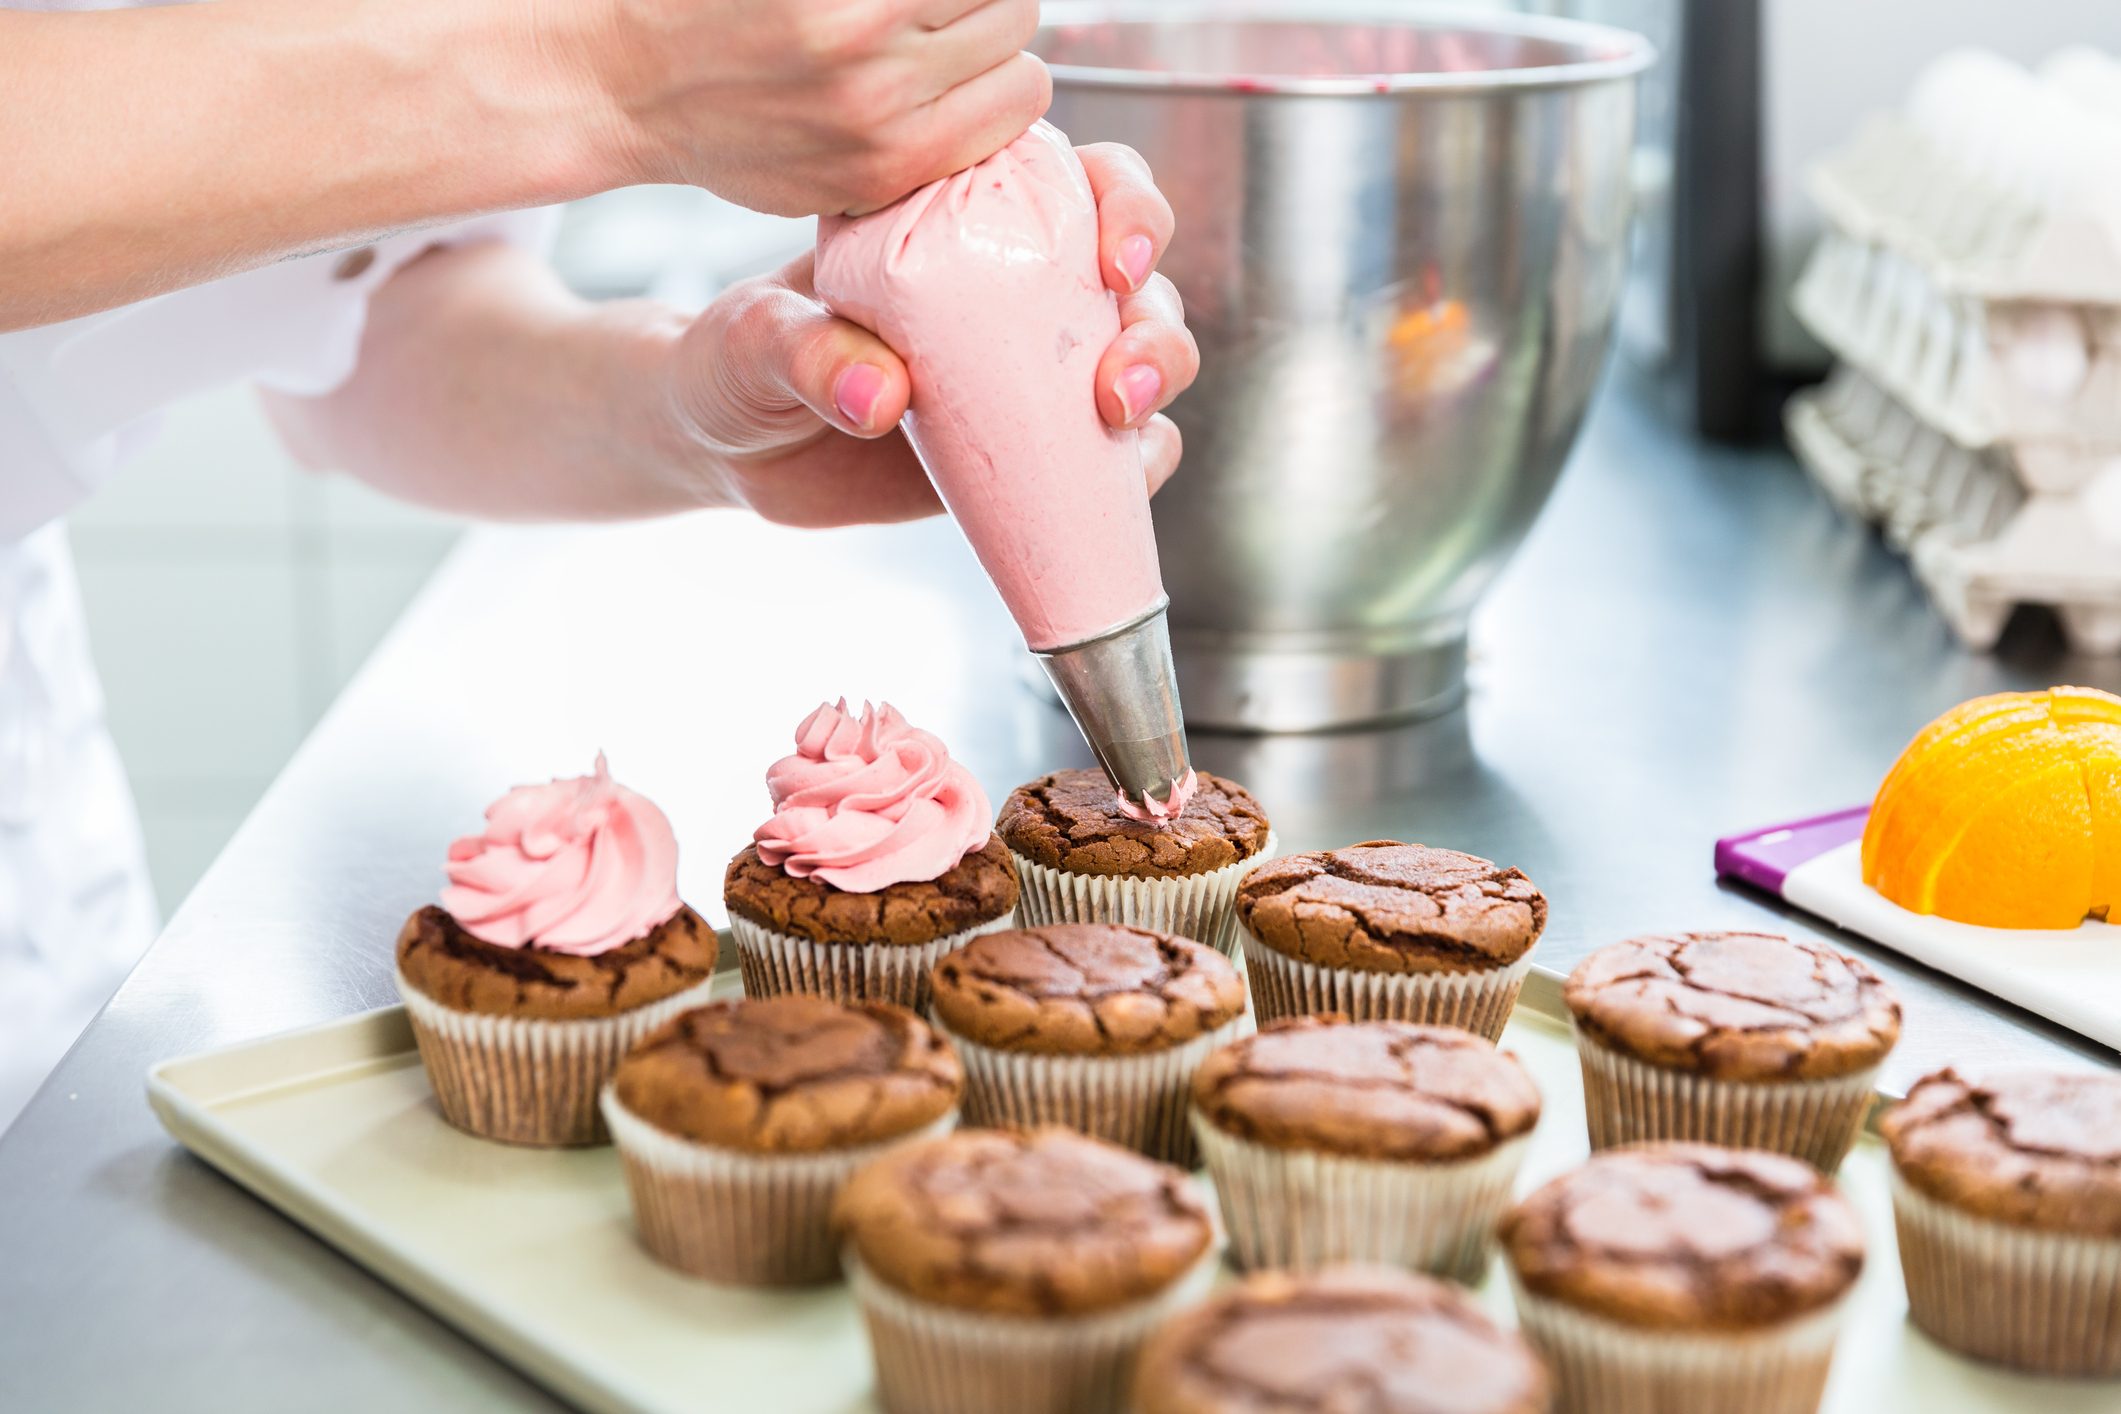 How to Use a Piping Bag Like a Pro